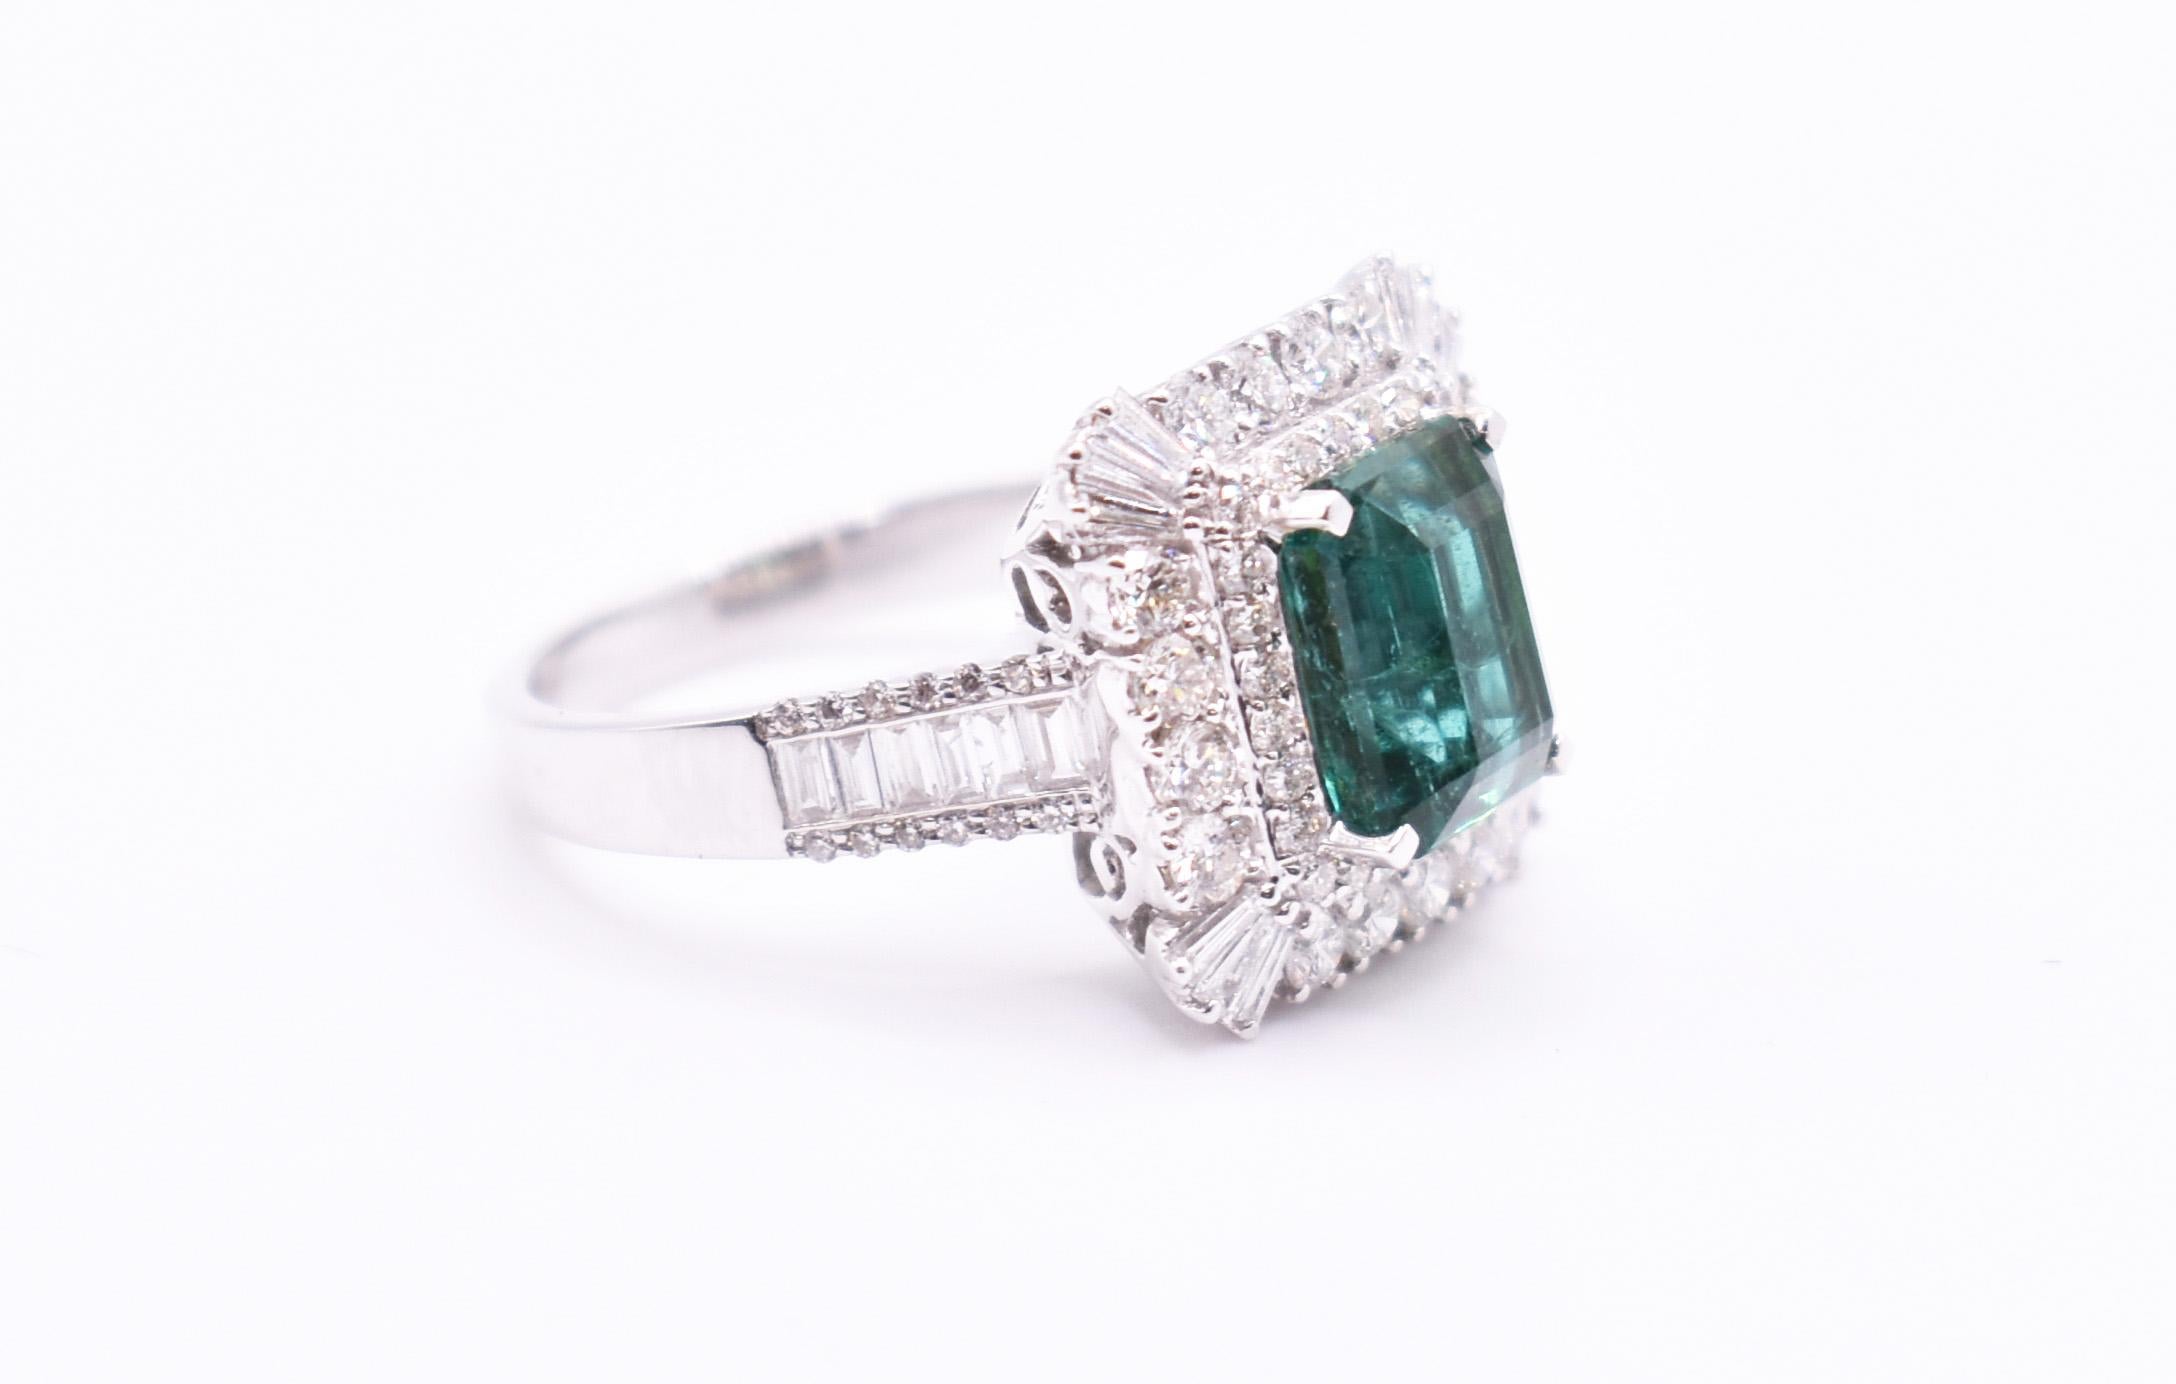 A beautiful 18k white gold emerald & diamond ring, featuring an emerald cut Zambian emerald in a prong setting, edged by a large quantity of diamonds, over a straight shank, with further round and baguette cut diamonds. Emerald = 2.81ct Diamonds =